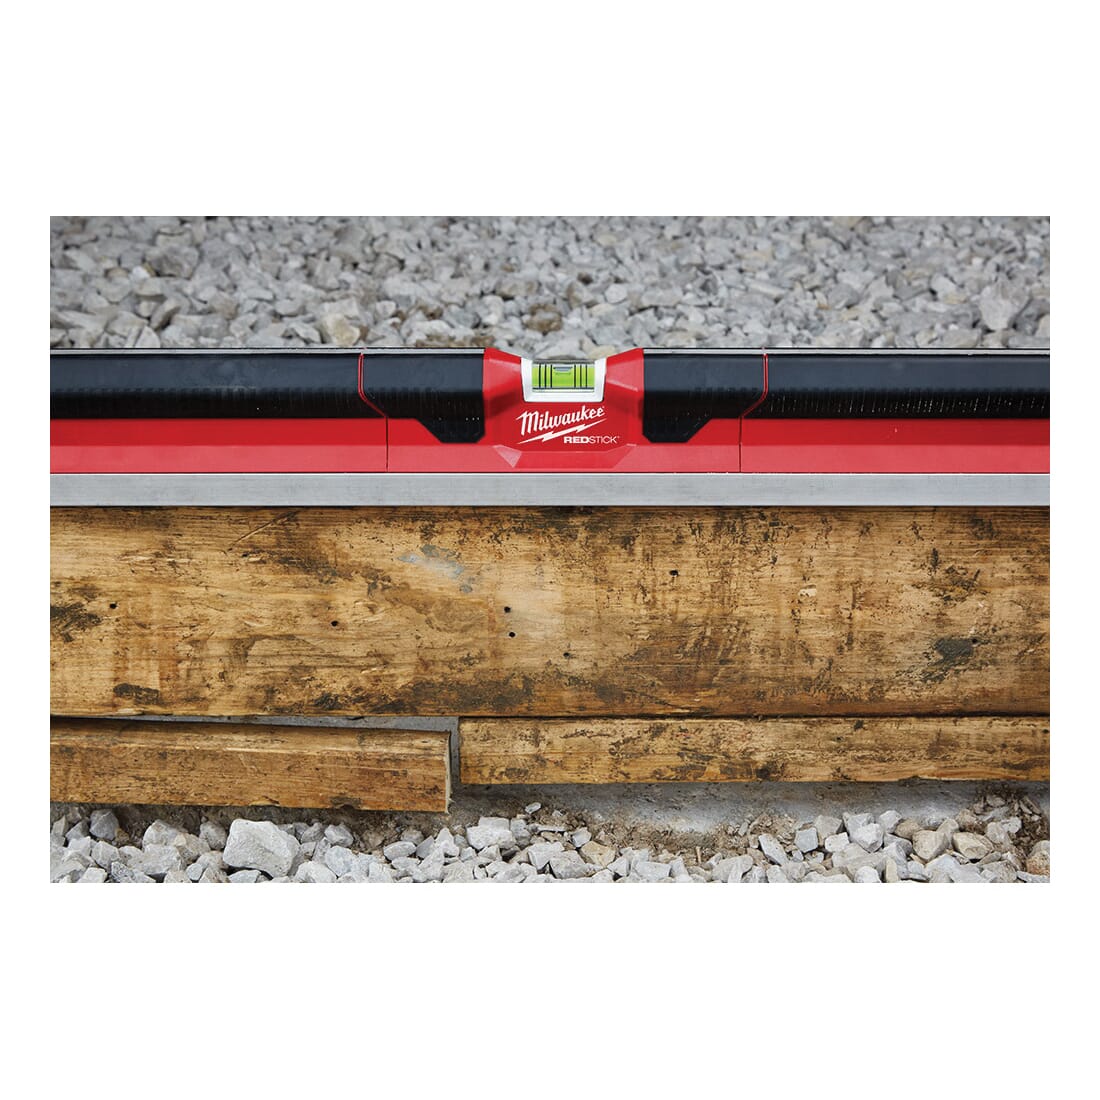 Milwaukee® REDSTICK™ MLCON72 Non-Magnetic Concrete Level, 72 in L, 3 Vials, Metal/Polymer, (1) Level/(3) Plumb Vial Position, 0.029 in Accuracy